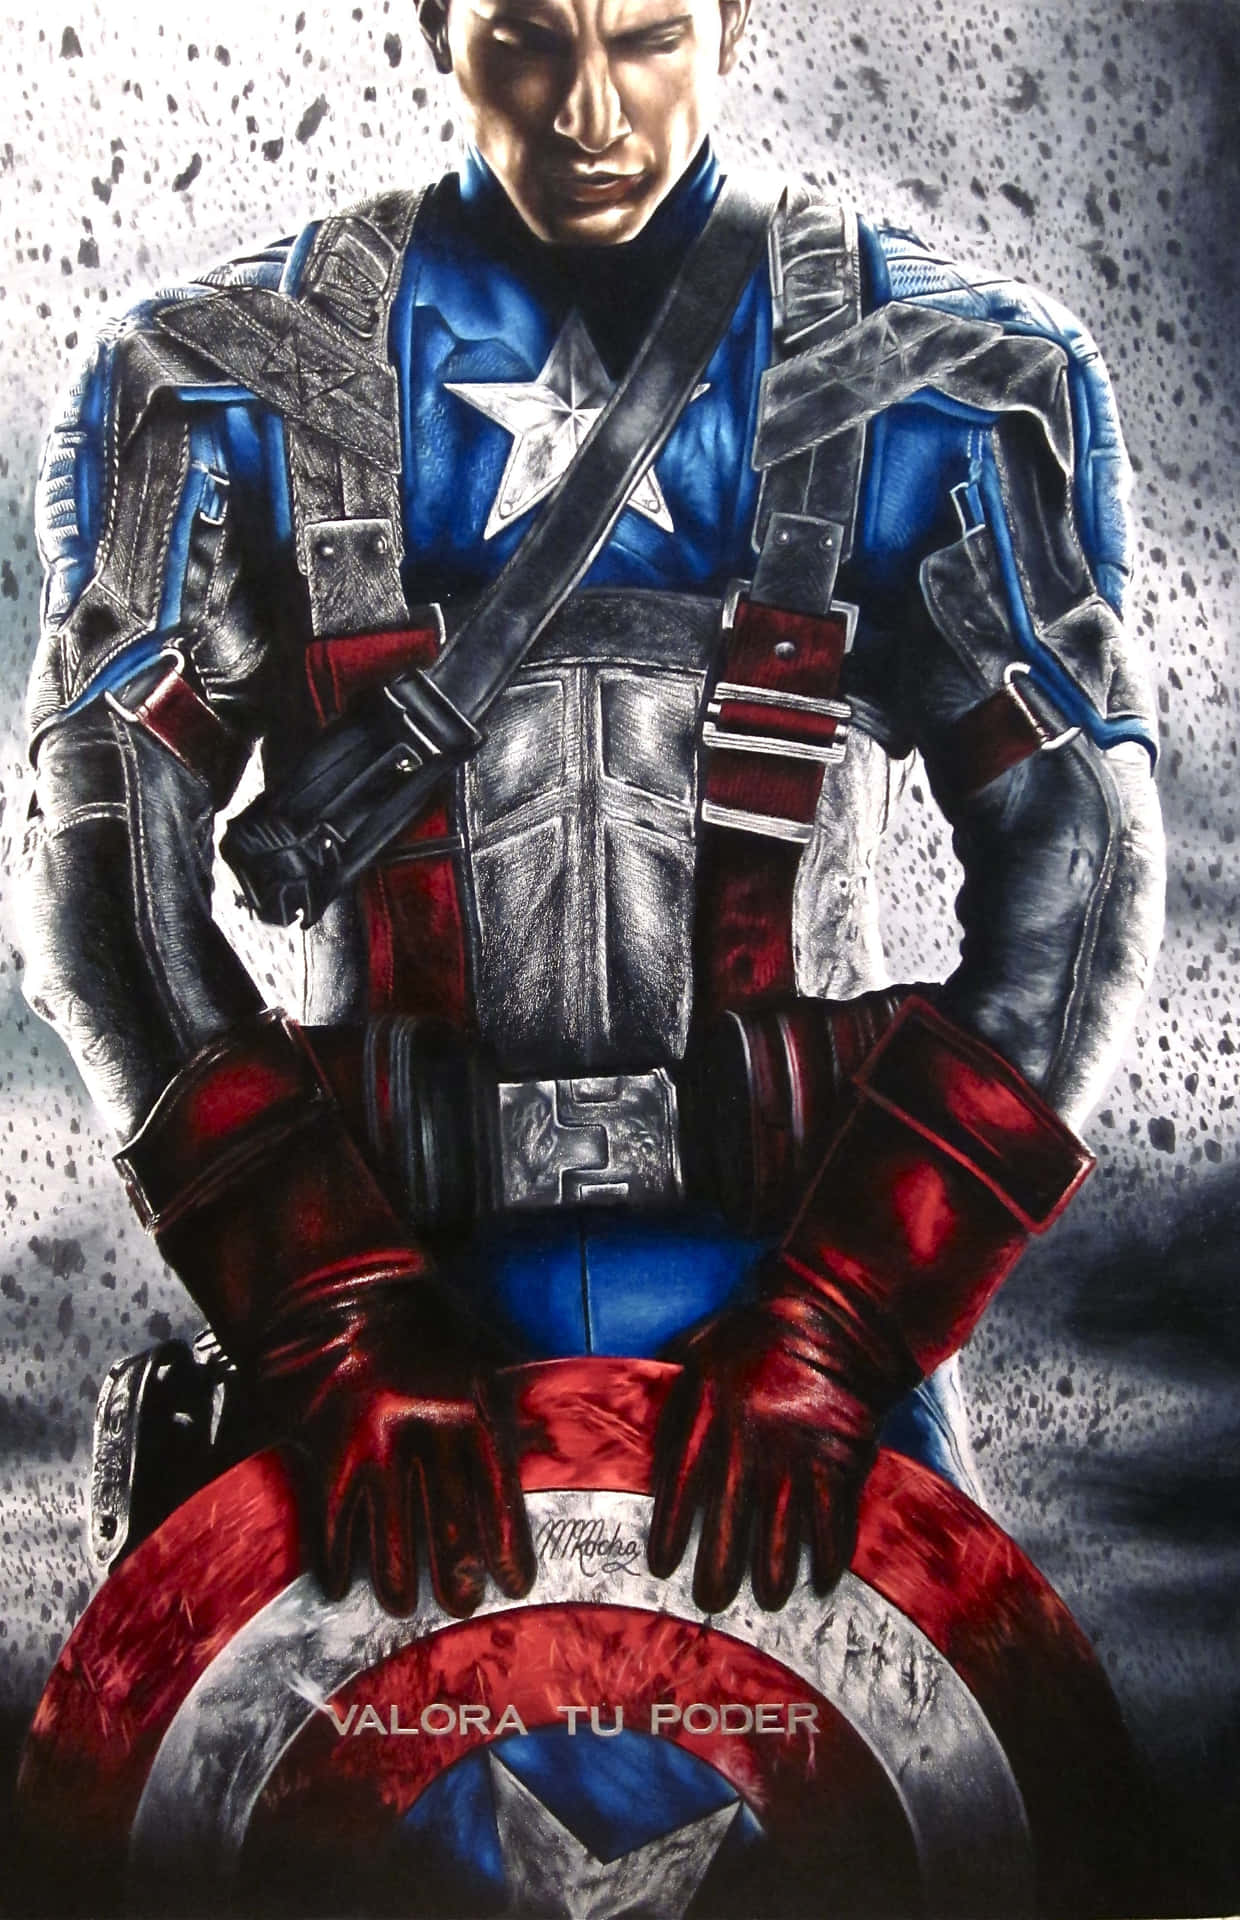 Show your support to Captain America with this eye-catching artwork.